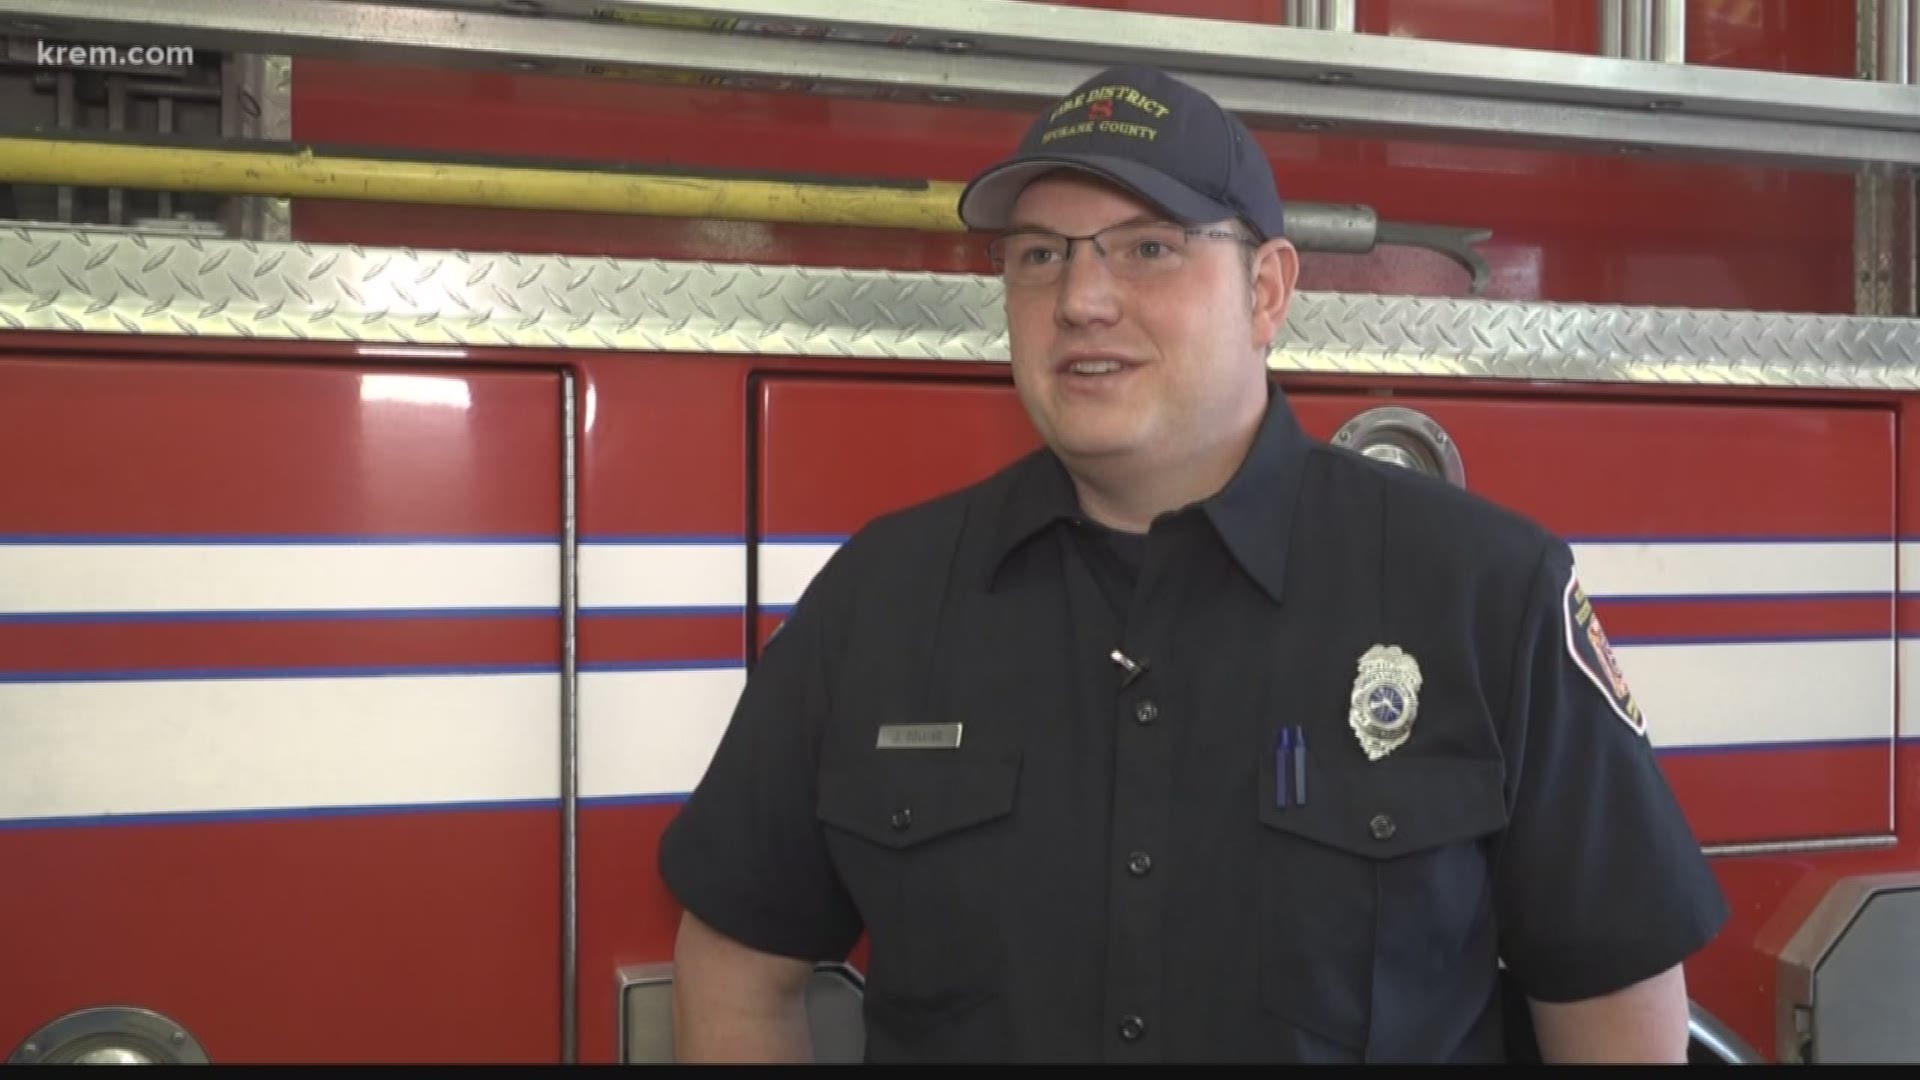 Spokane County firefighters went beyond the call of duty this week. One of them even helped save a man's life.